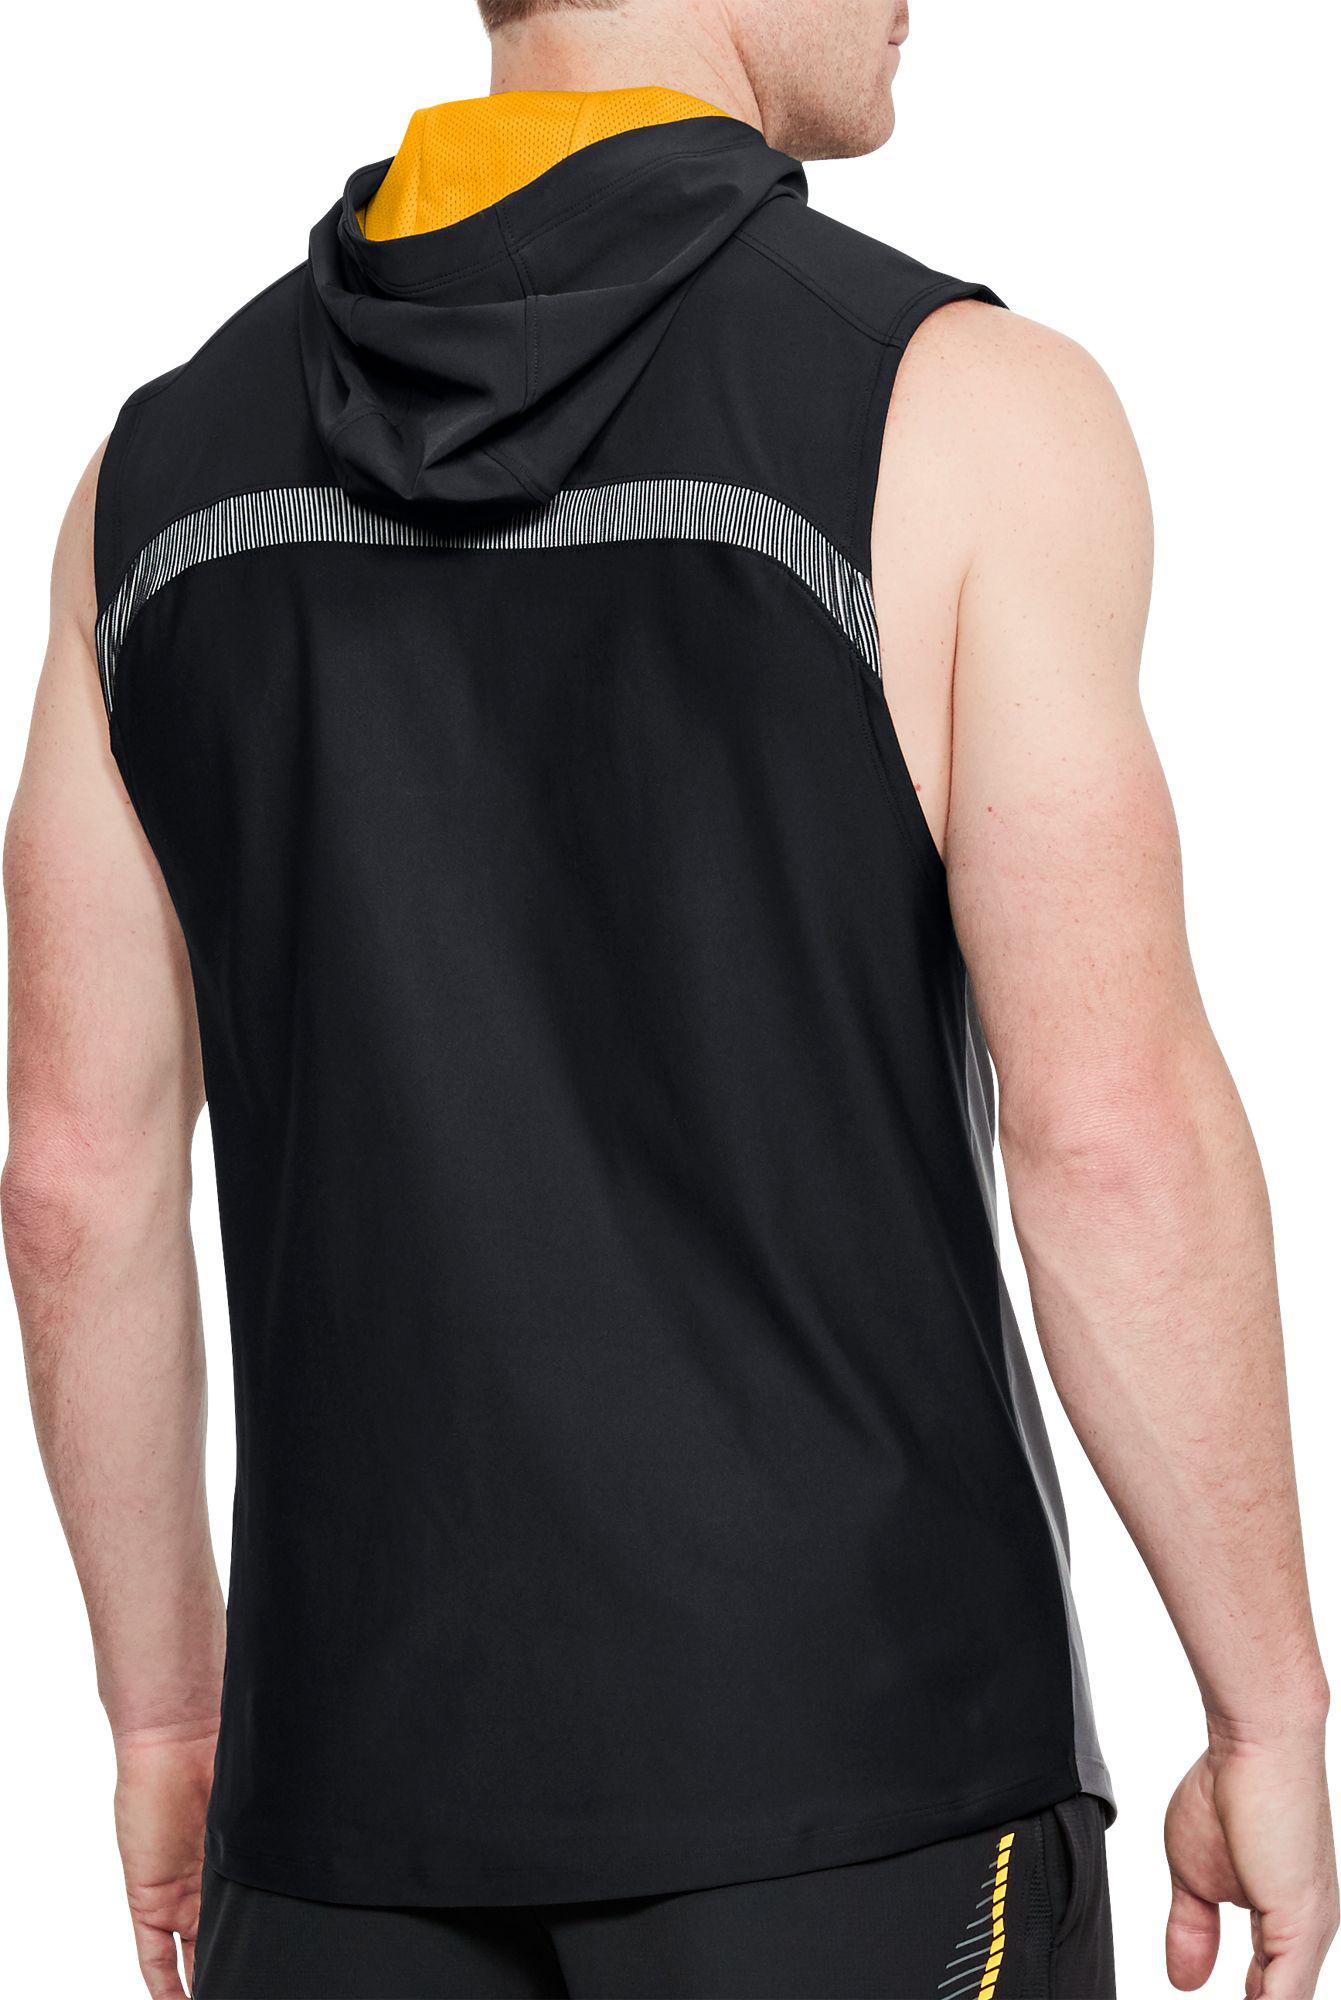 Lyst - Under Armour Project Rock Vanish Sleeveless Hoodie in Black for Men